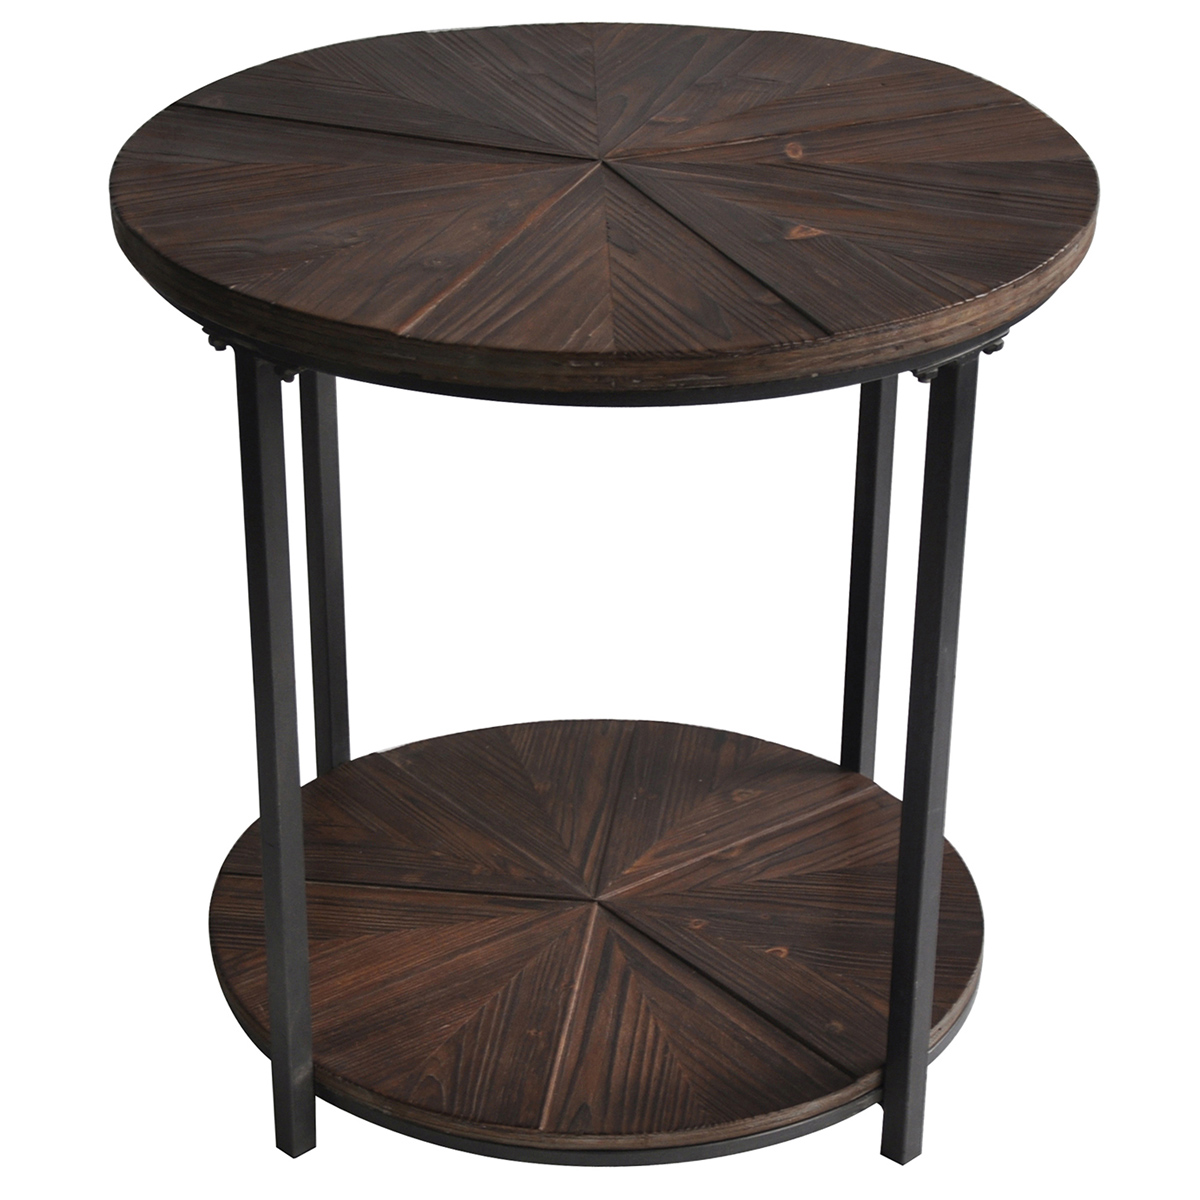 accent table ideas probably terrific best the rustic teal winsome wood round end jackson metal and light brown wicker patio furniture cabinet legs coffee holder ikea short altra